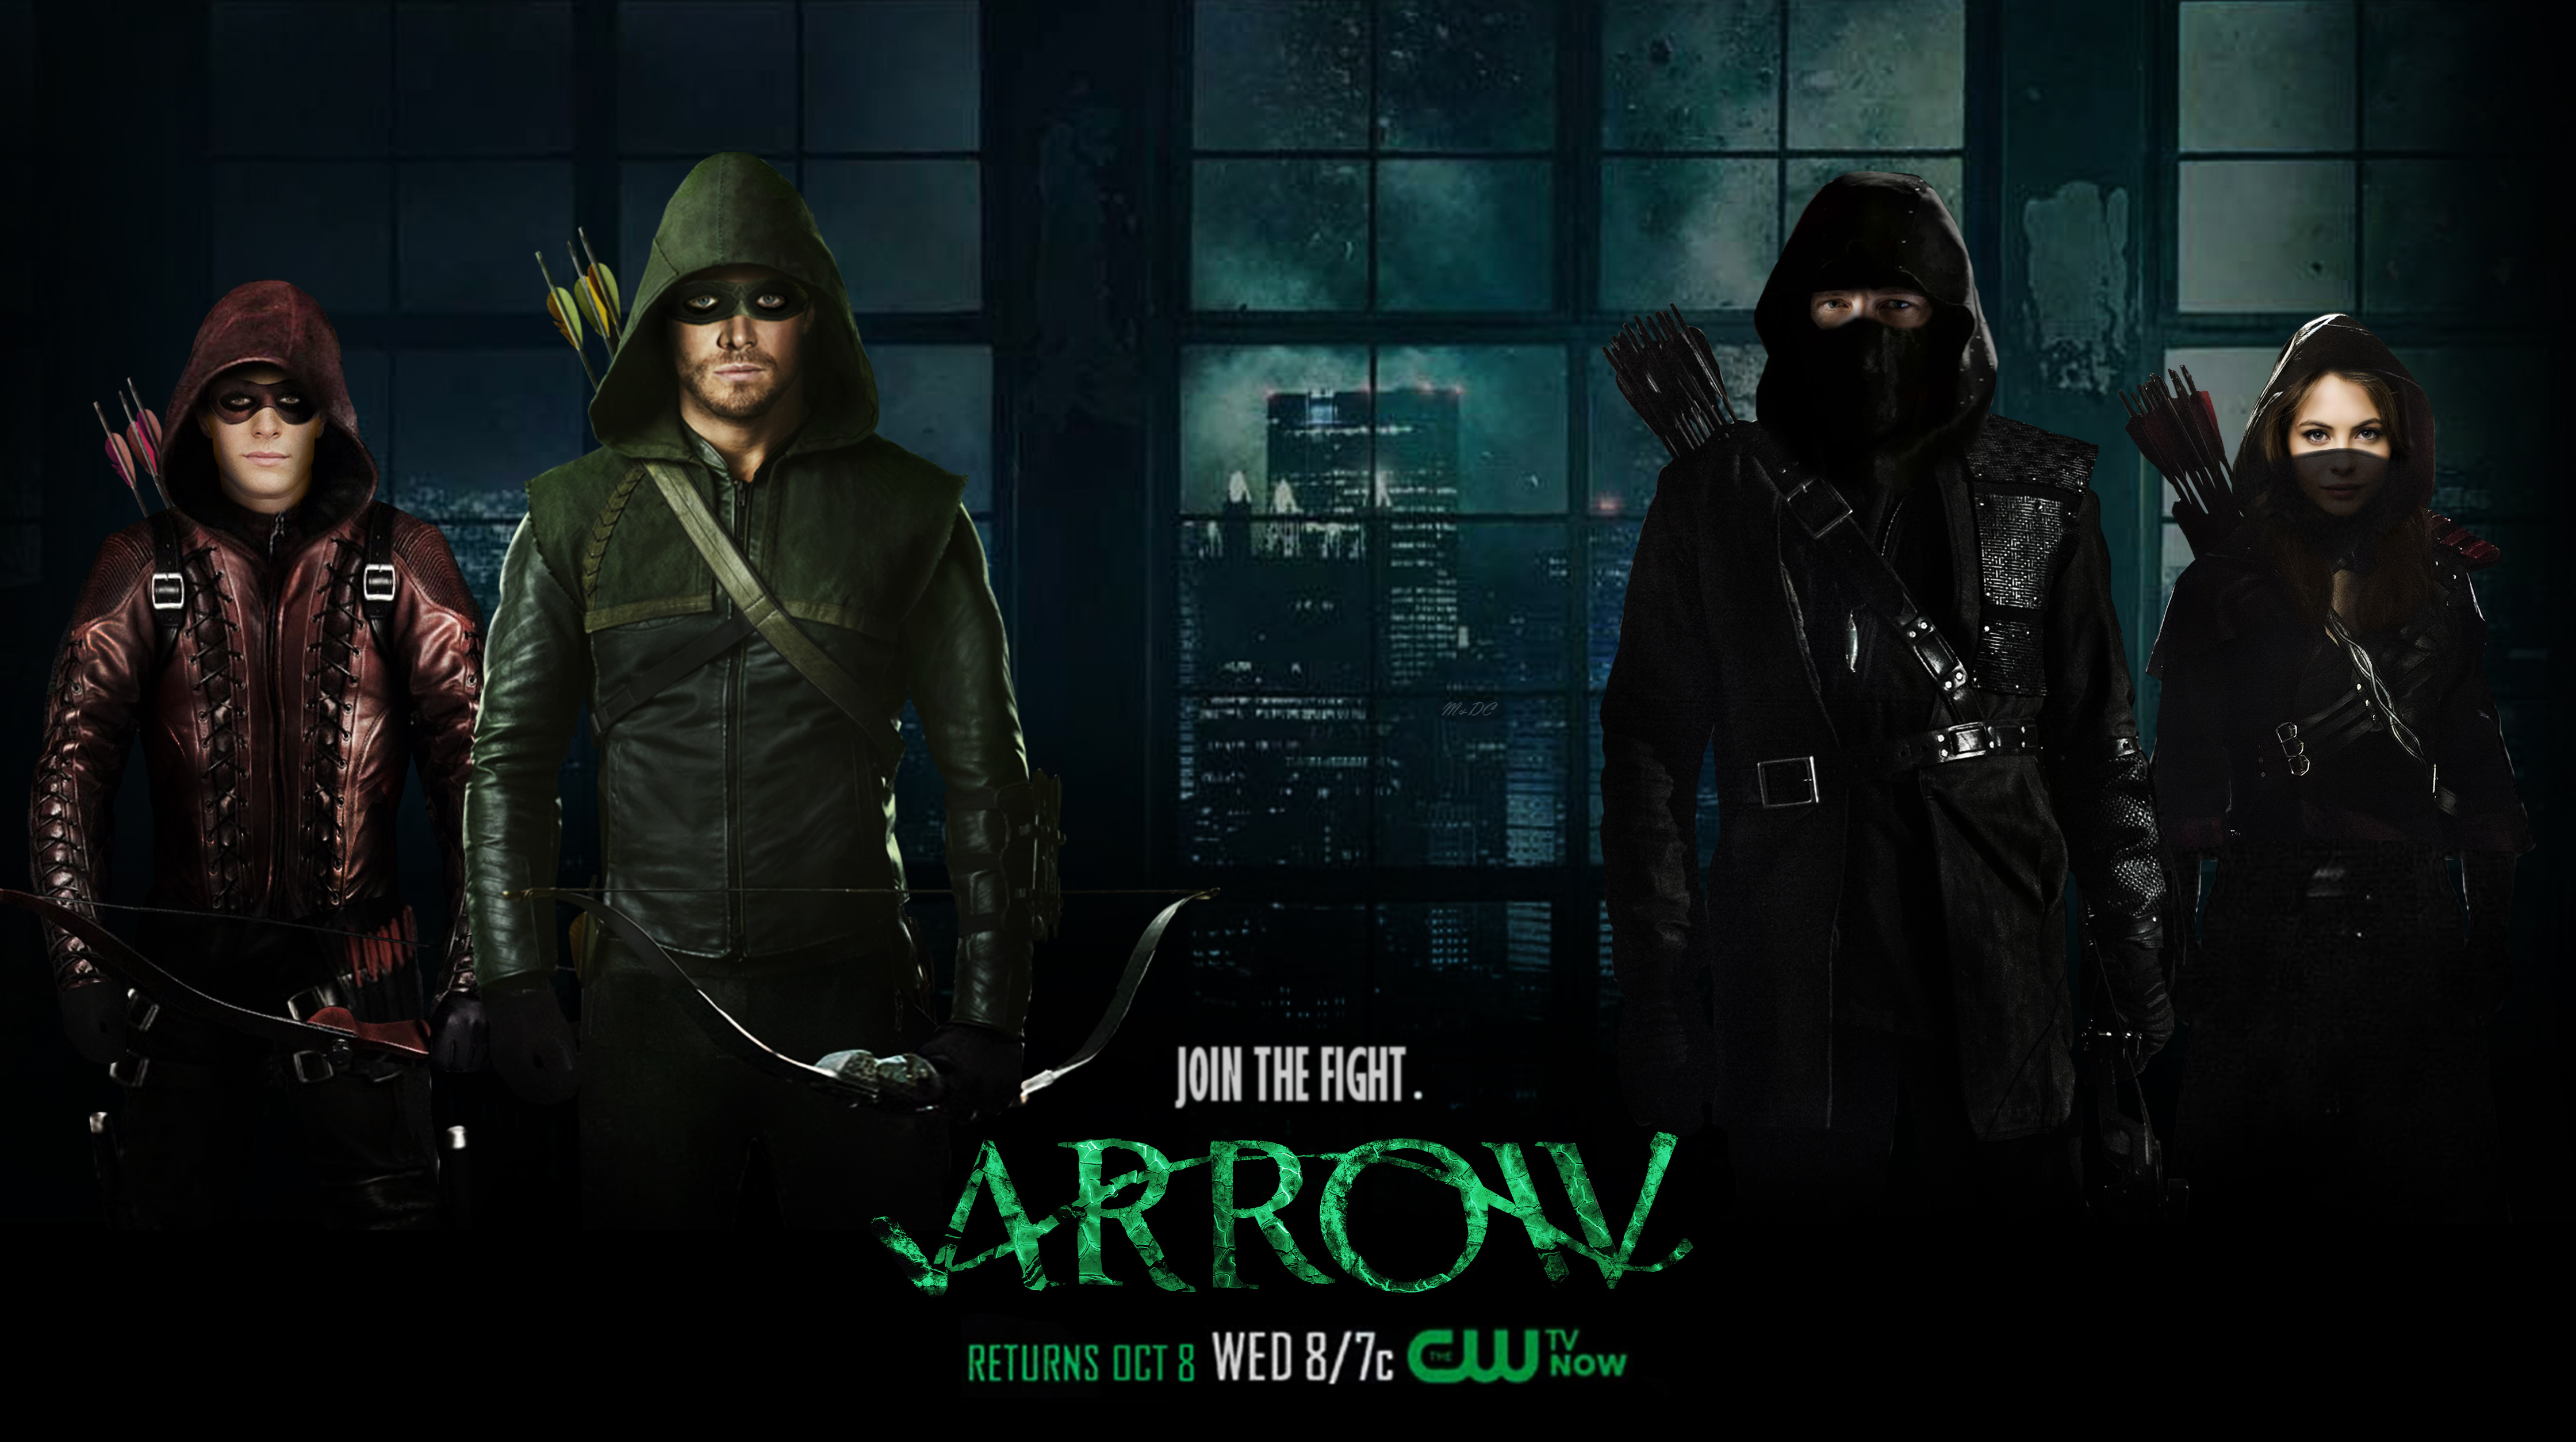 Arrow Wallpaper High Resolution and Quality Download